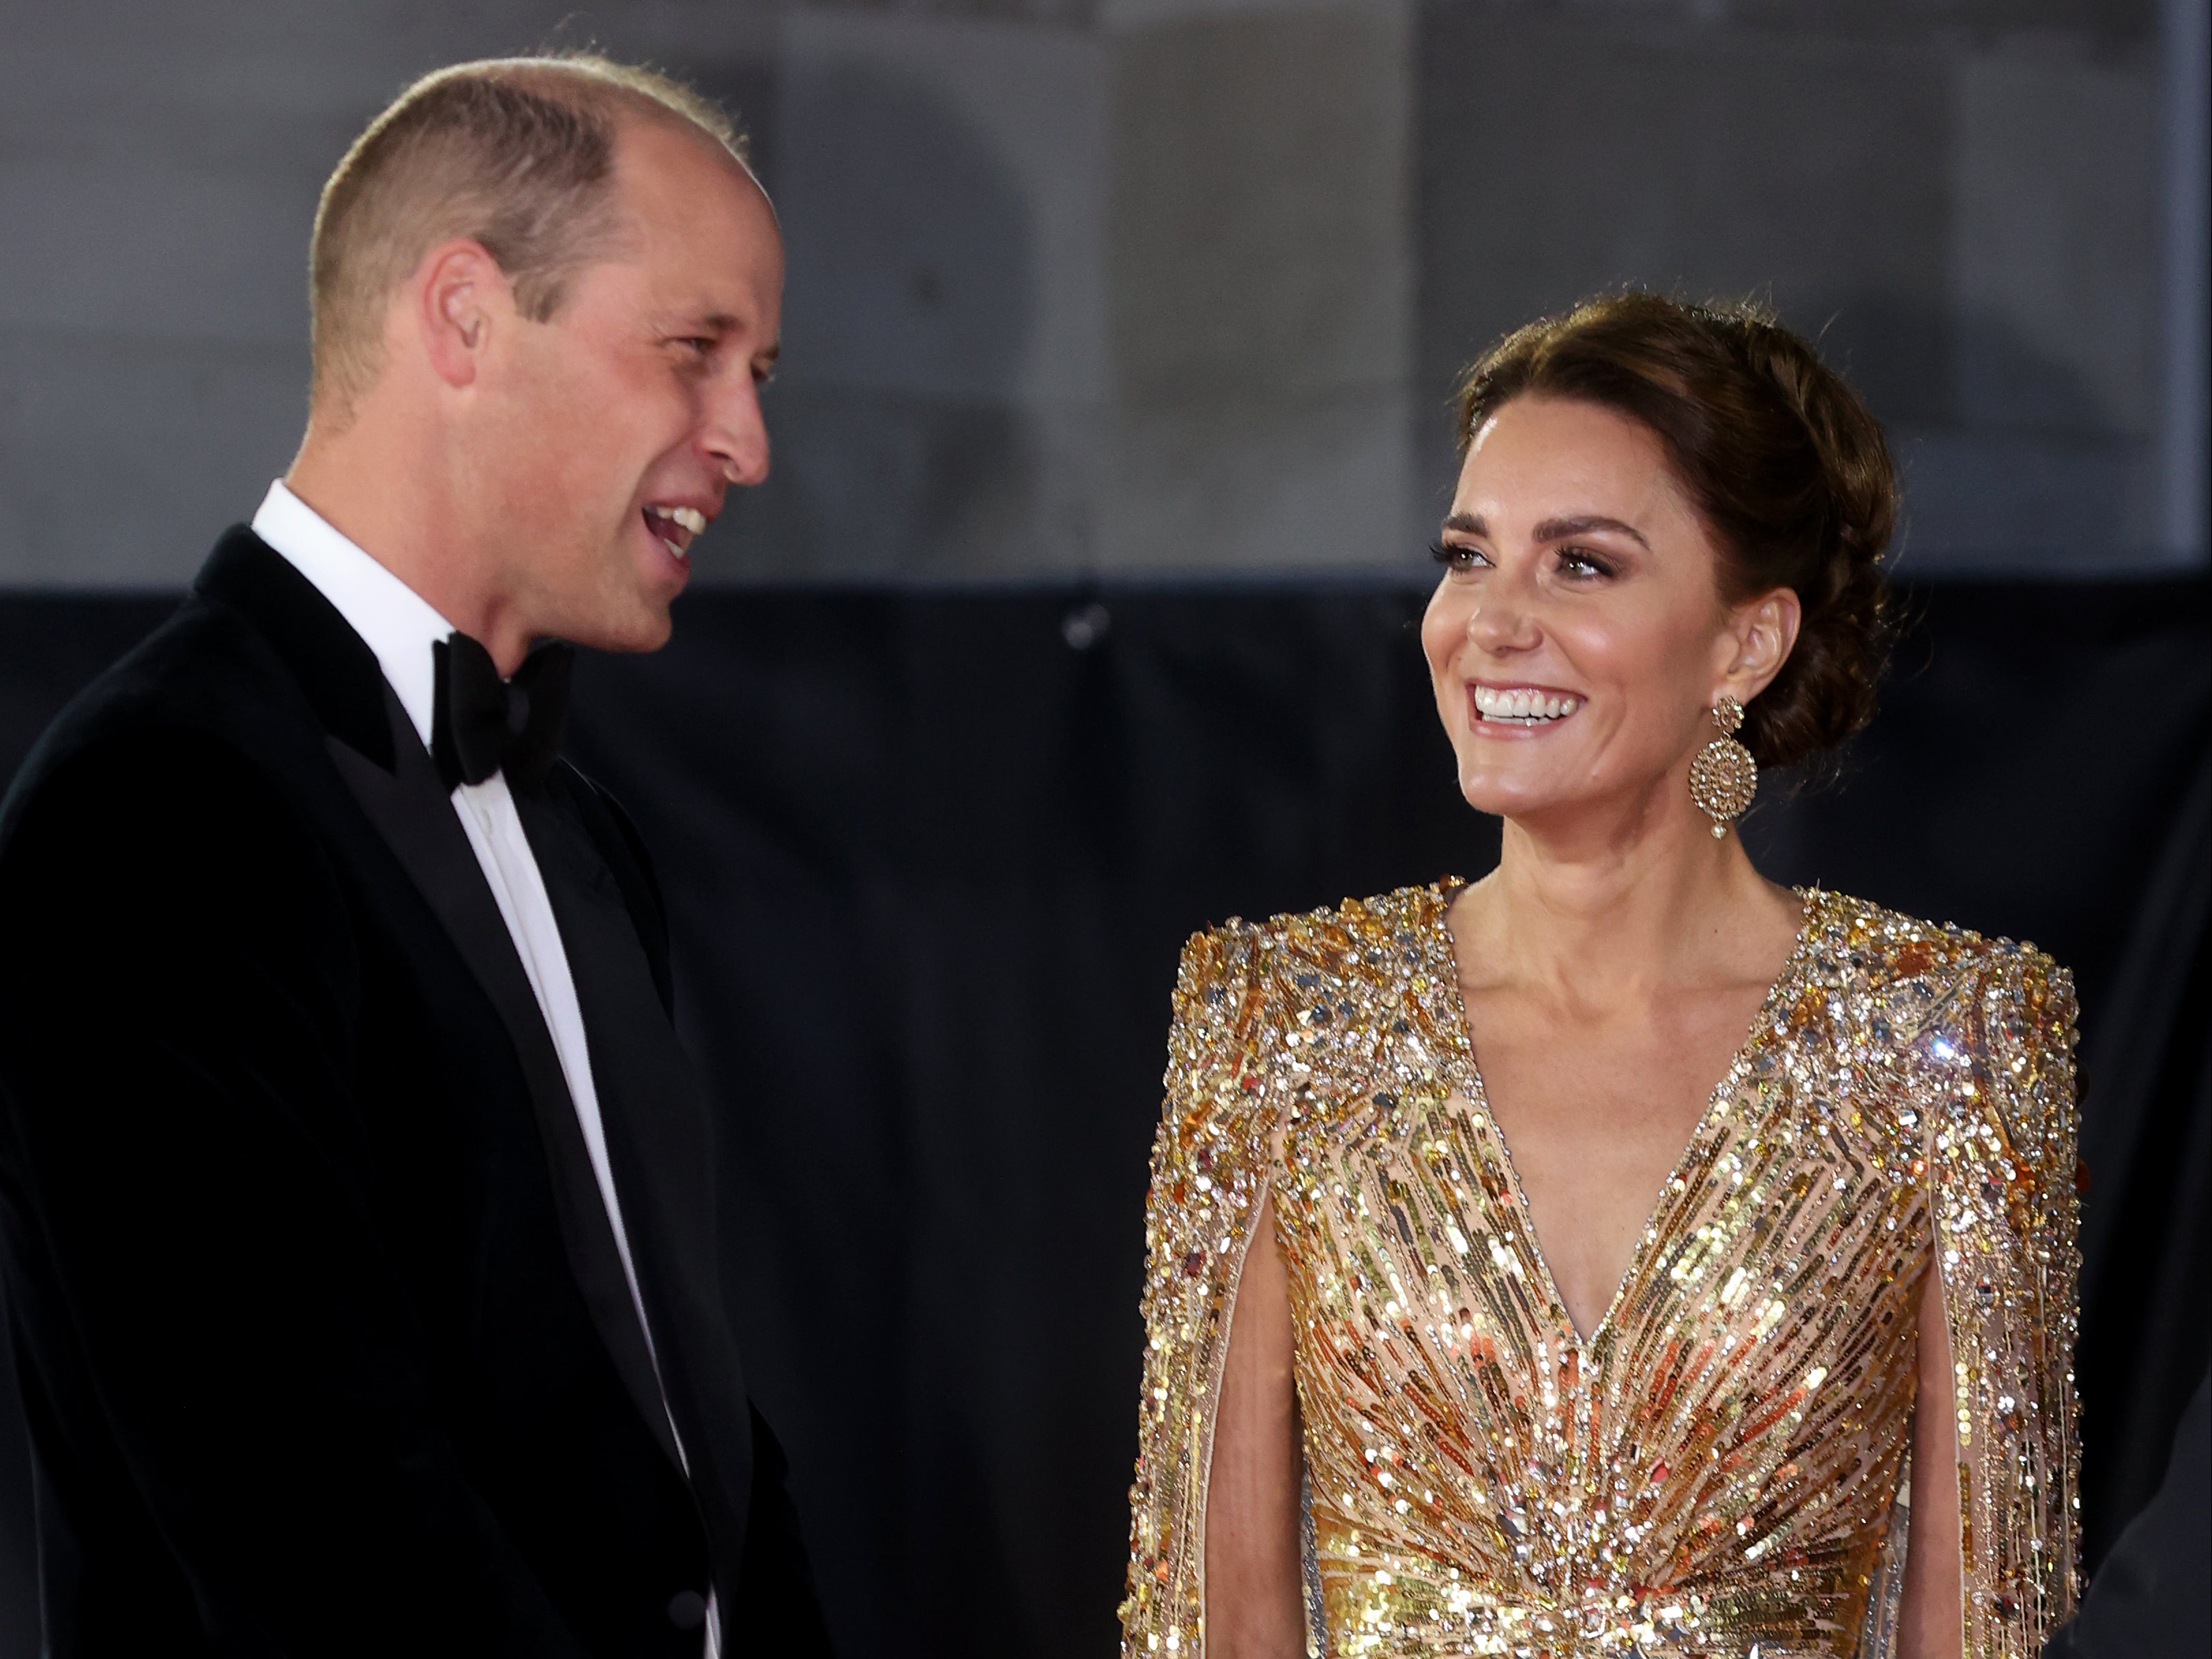 Prince William and Kate Middleton at the No Time To Die premiere